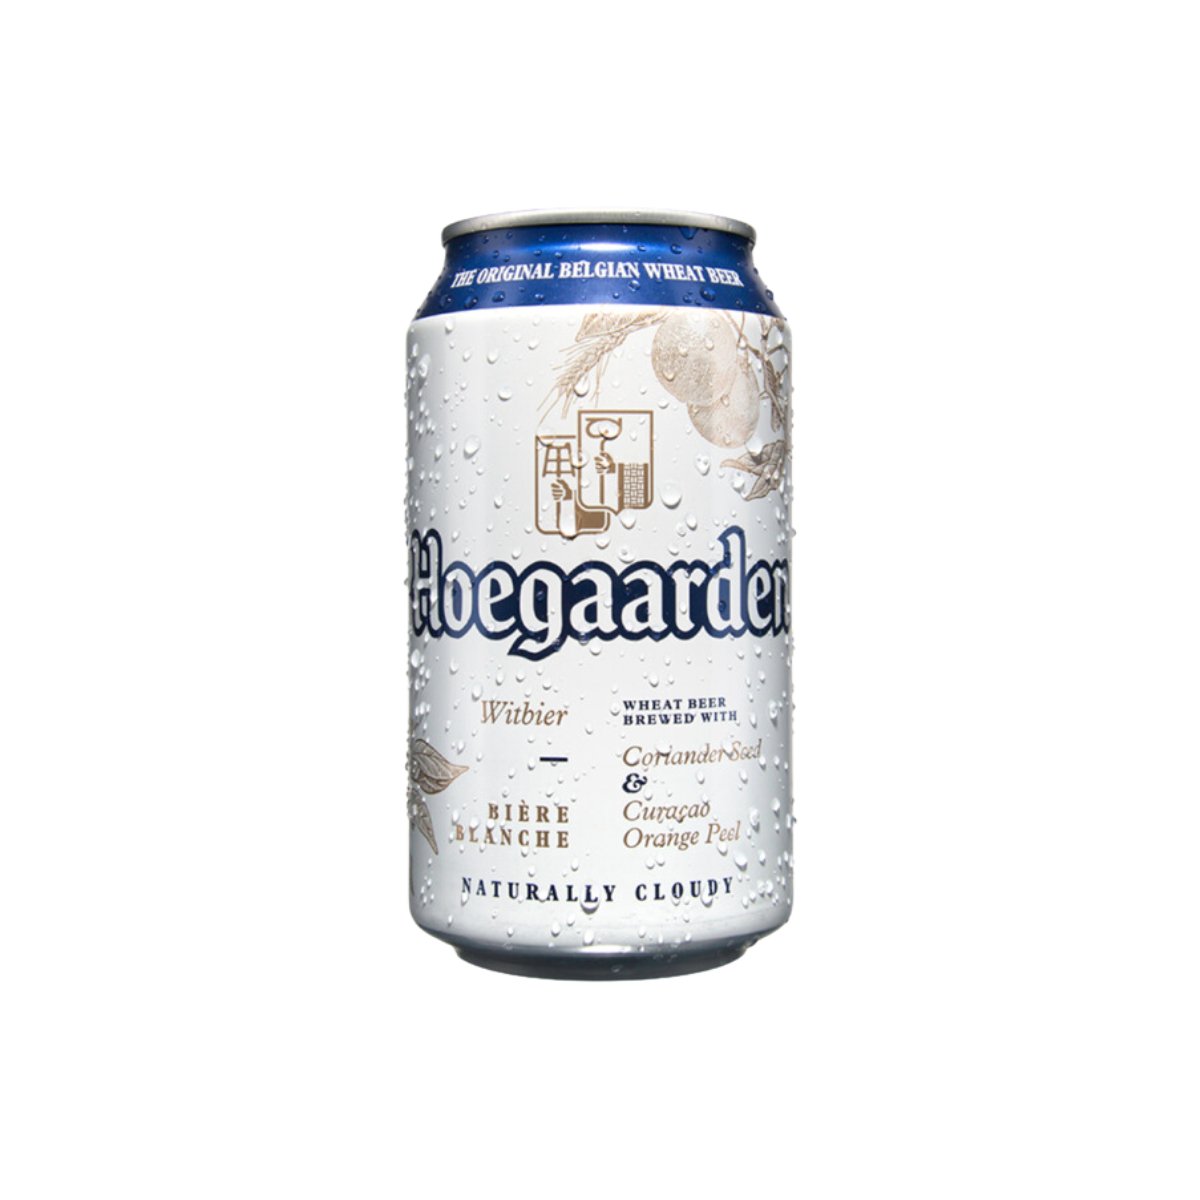 Hoegaarden White Wheat Beer in-can 330ml